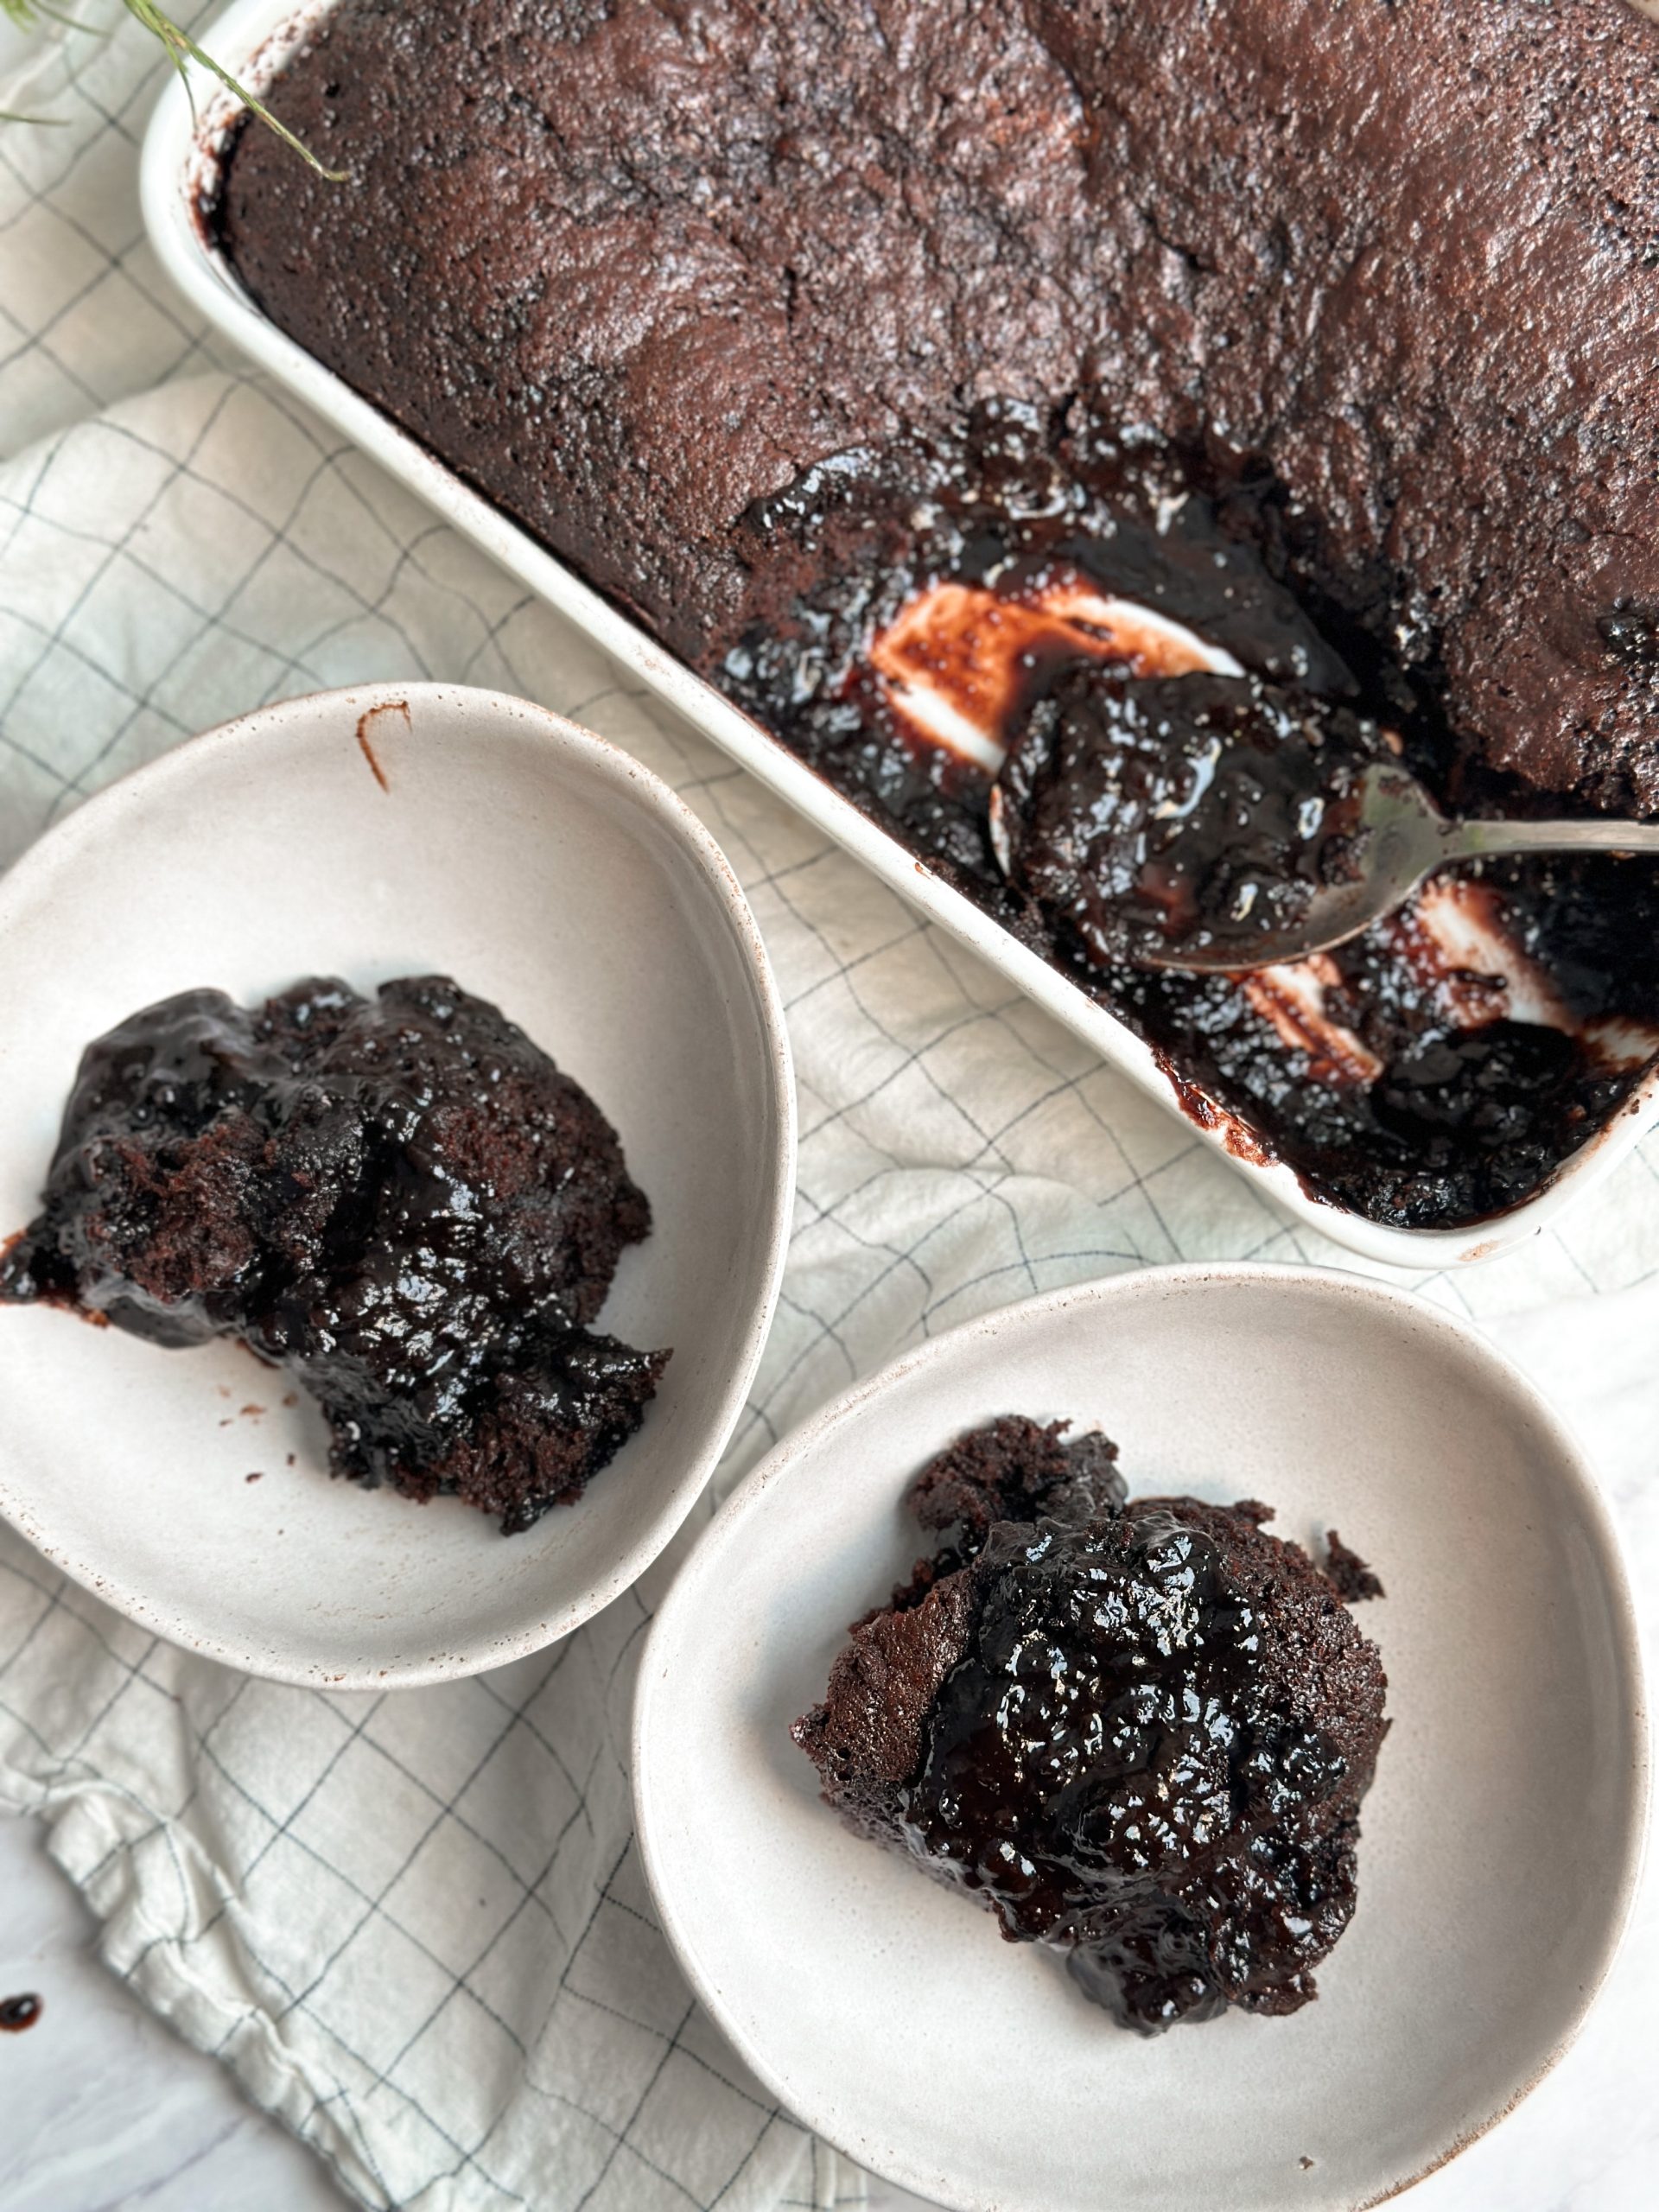 hot fudge chocolate cake in a ceramic dish with 2 spoon pulled out into 2 bowl revealing layer of hot fudge sauce under the cake. cake is moist and rich and saucy